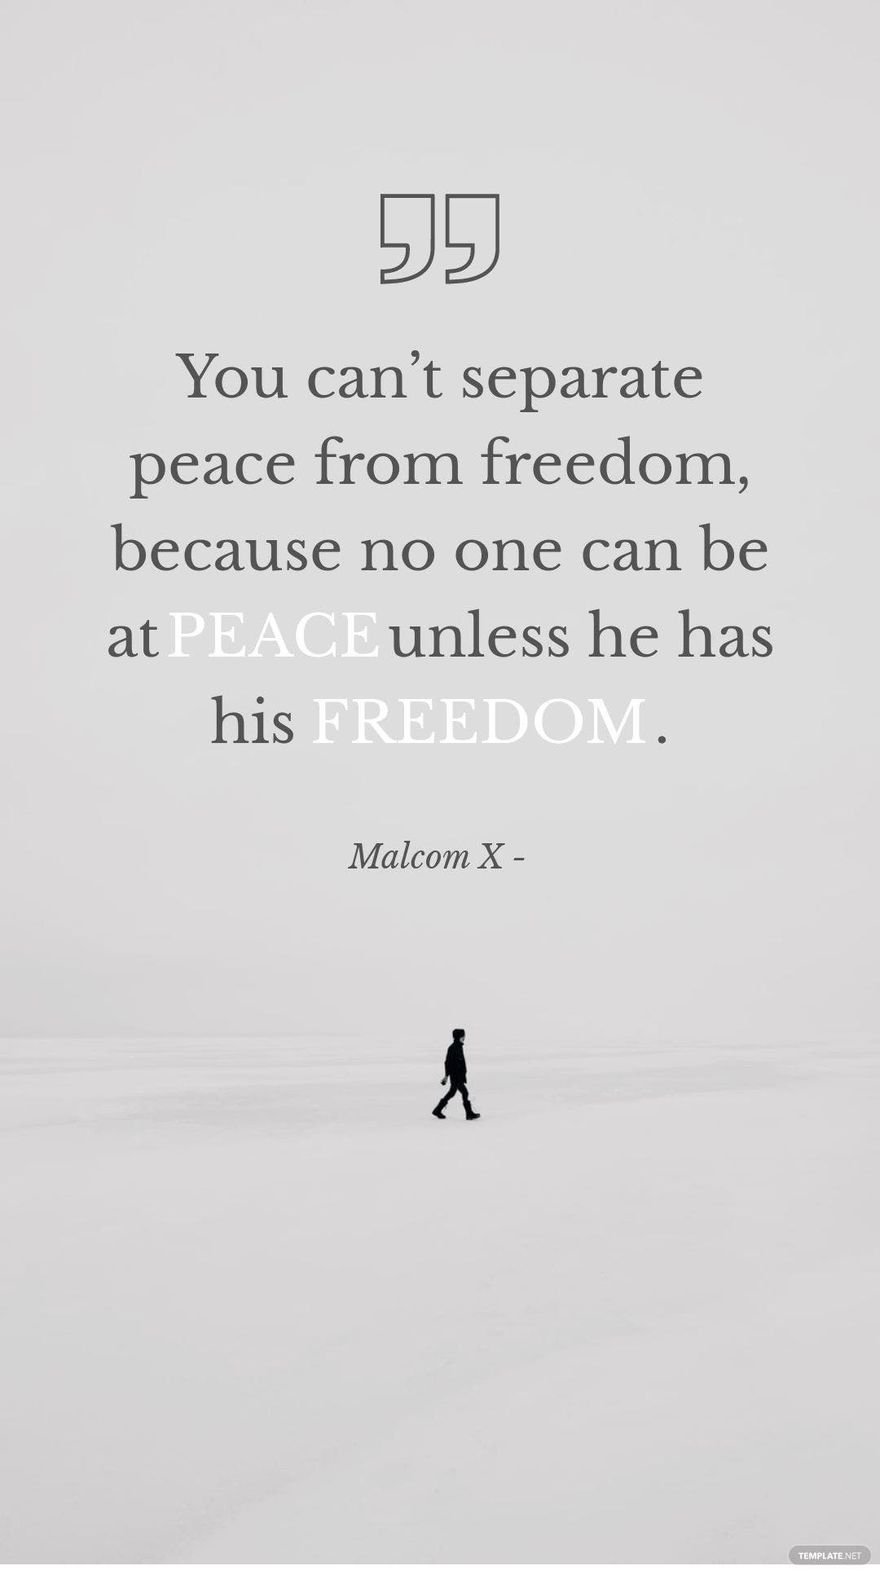 Free Malcom X - You can’t separate peace from freedom, because no one can be at peace unless he has his freedom. in JPG